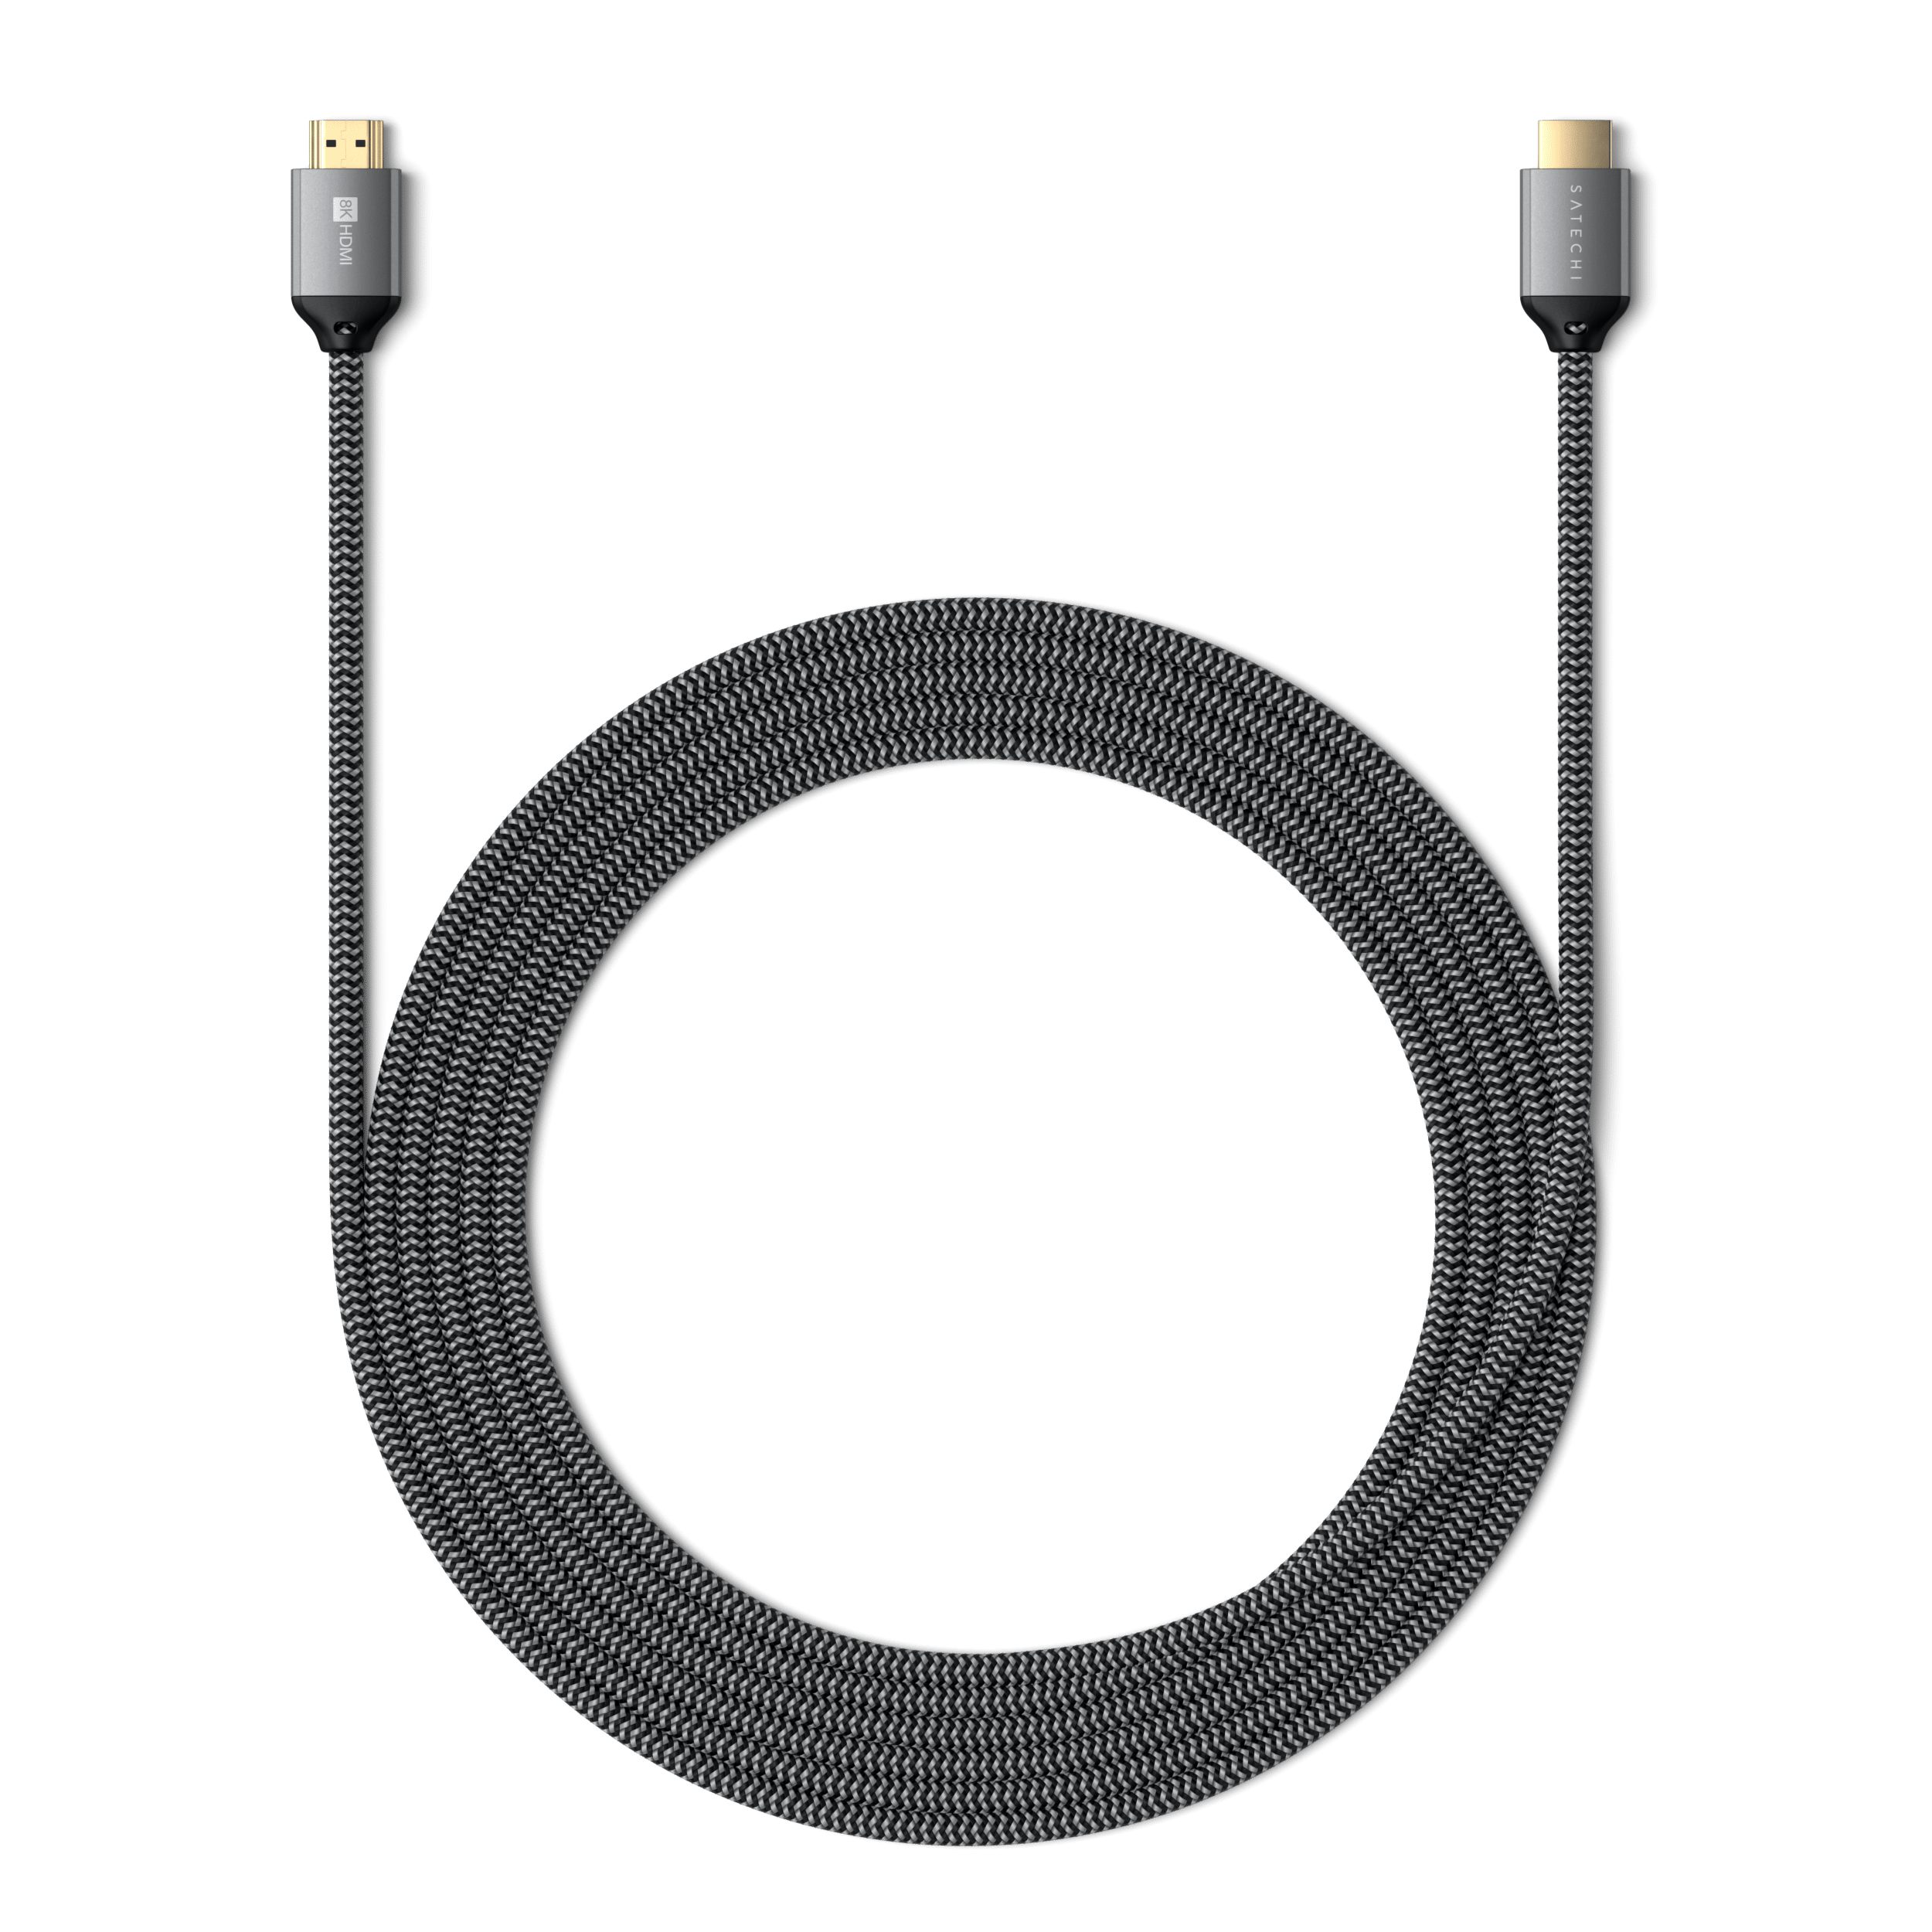 8K ULTRA HD High Speed HDMI 2.1 Cable Cables Satechi